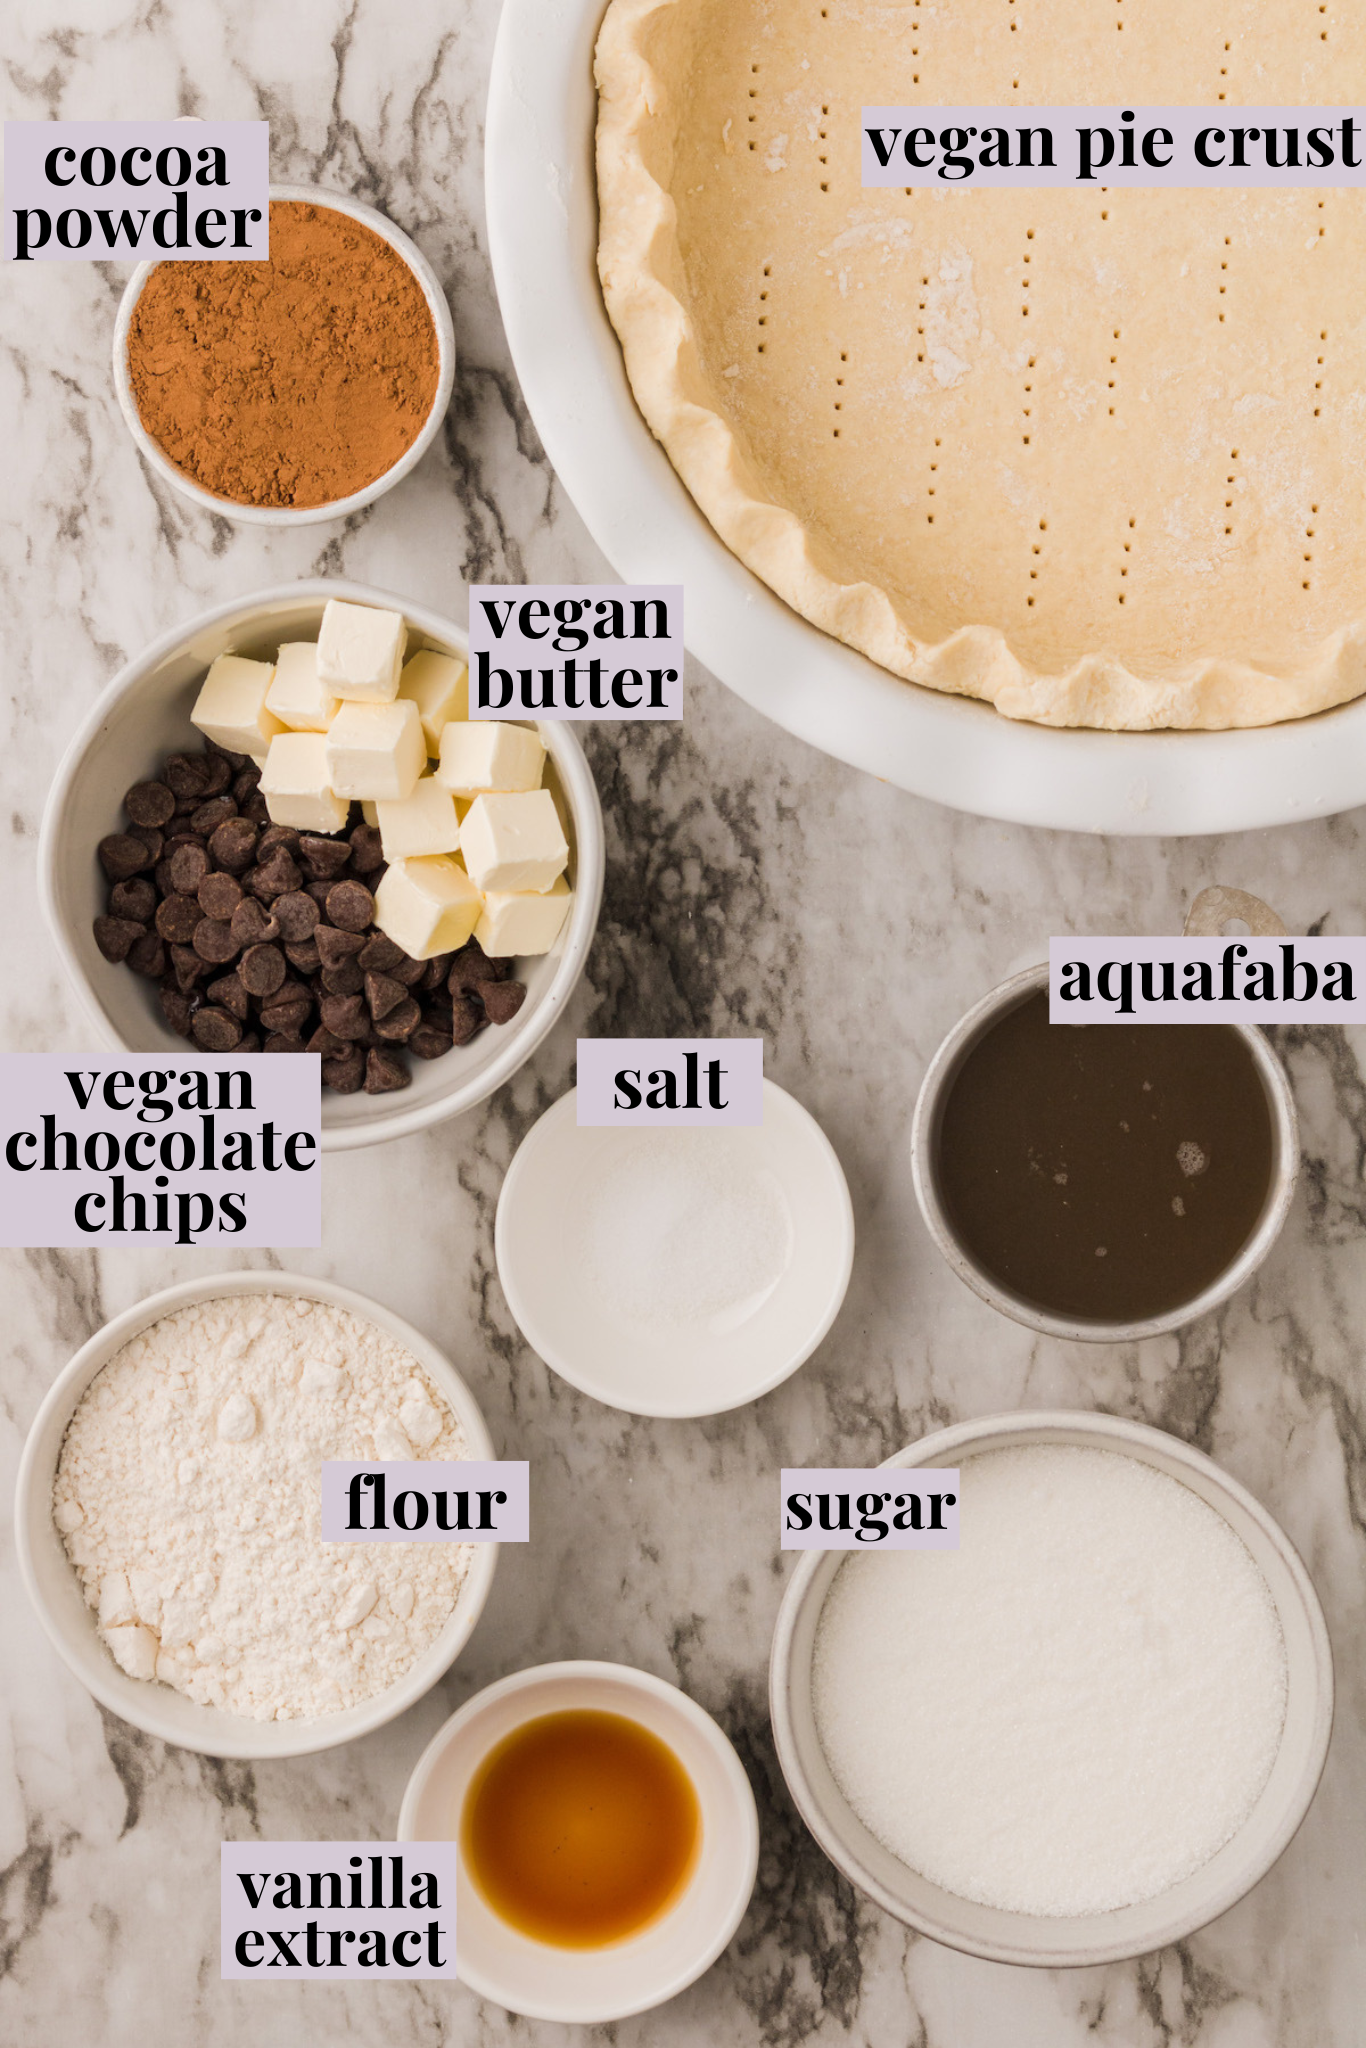 Overhead view of ingredients for vegan chocolate chess pie